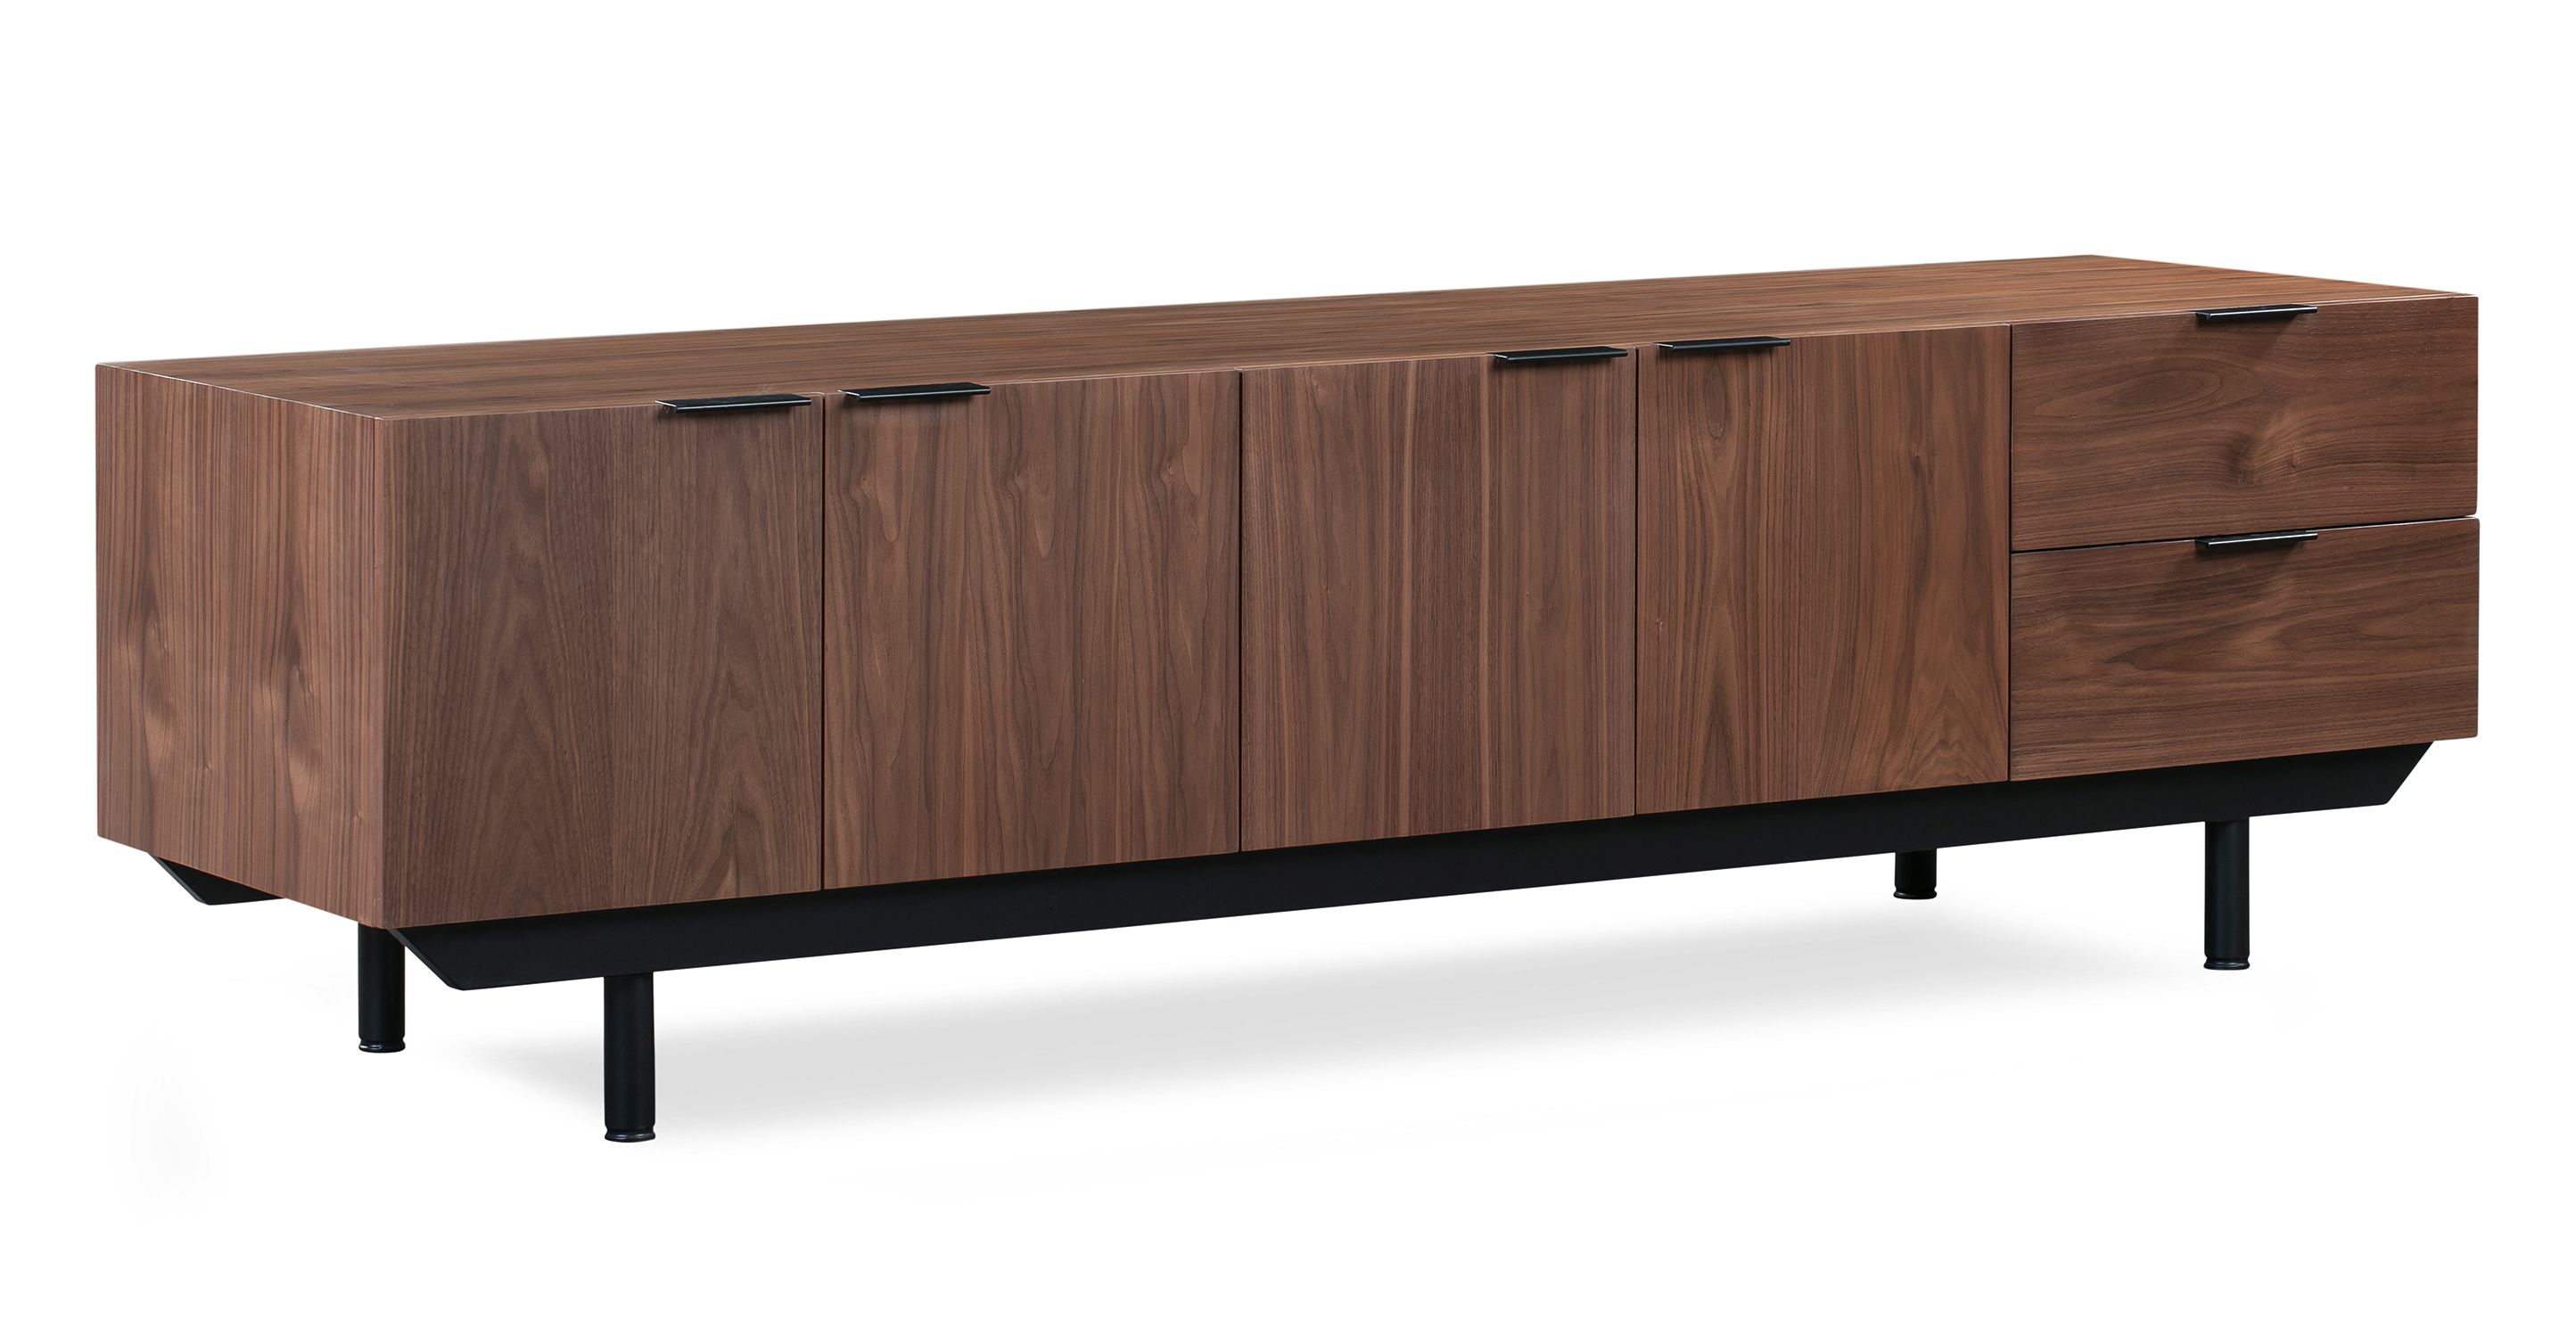 The Structure credenza has a walnut wood exterior and drawer. To the left and center are two sets of cabinet doors with black top-mount pulls. On the right are two pull-out drawers with top mount pulls. The frame is black and metal, and has four round feet. 